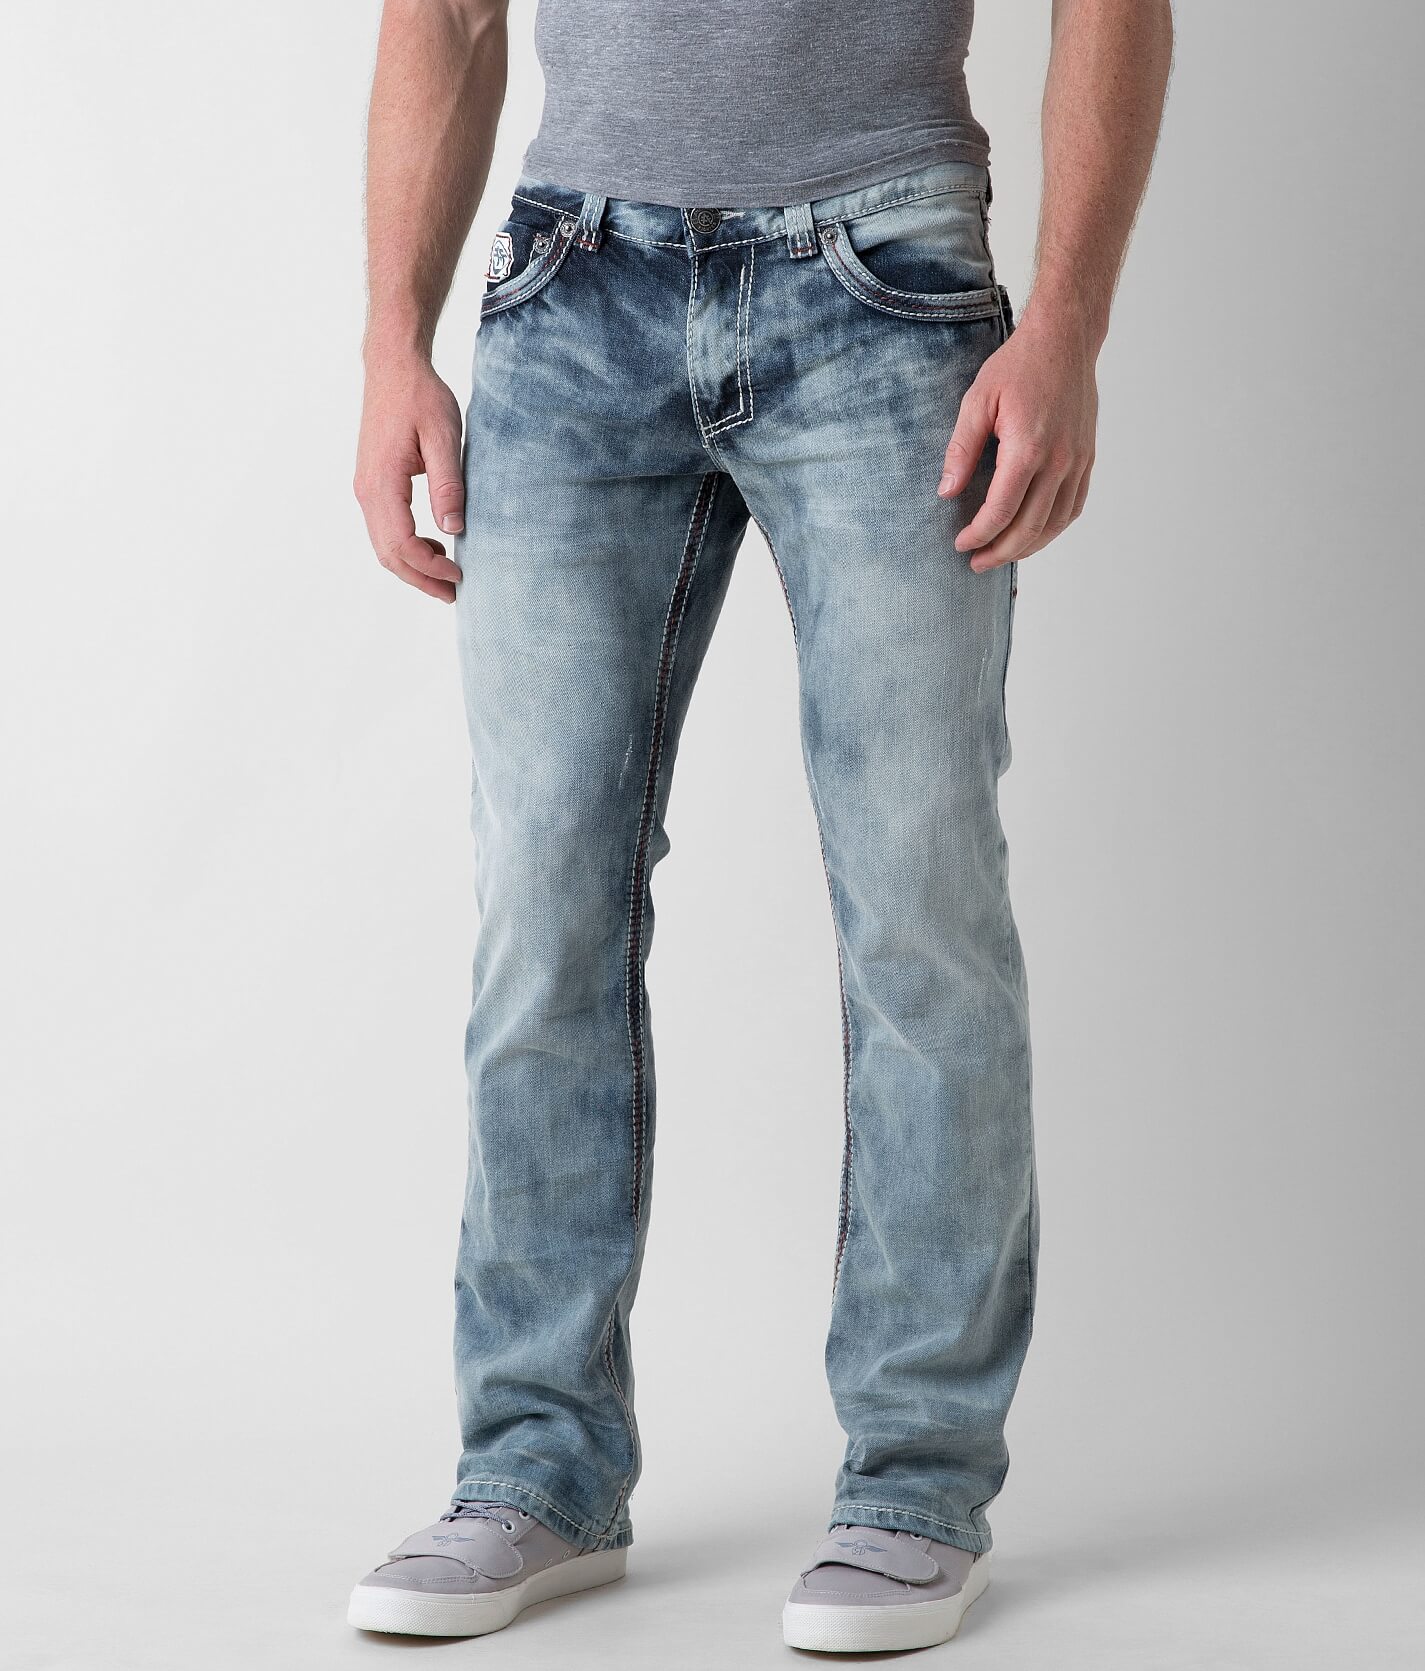 mens american fighter jeans